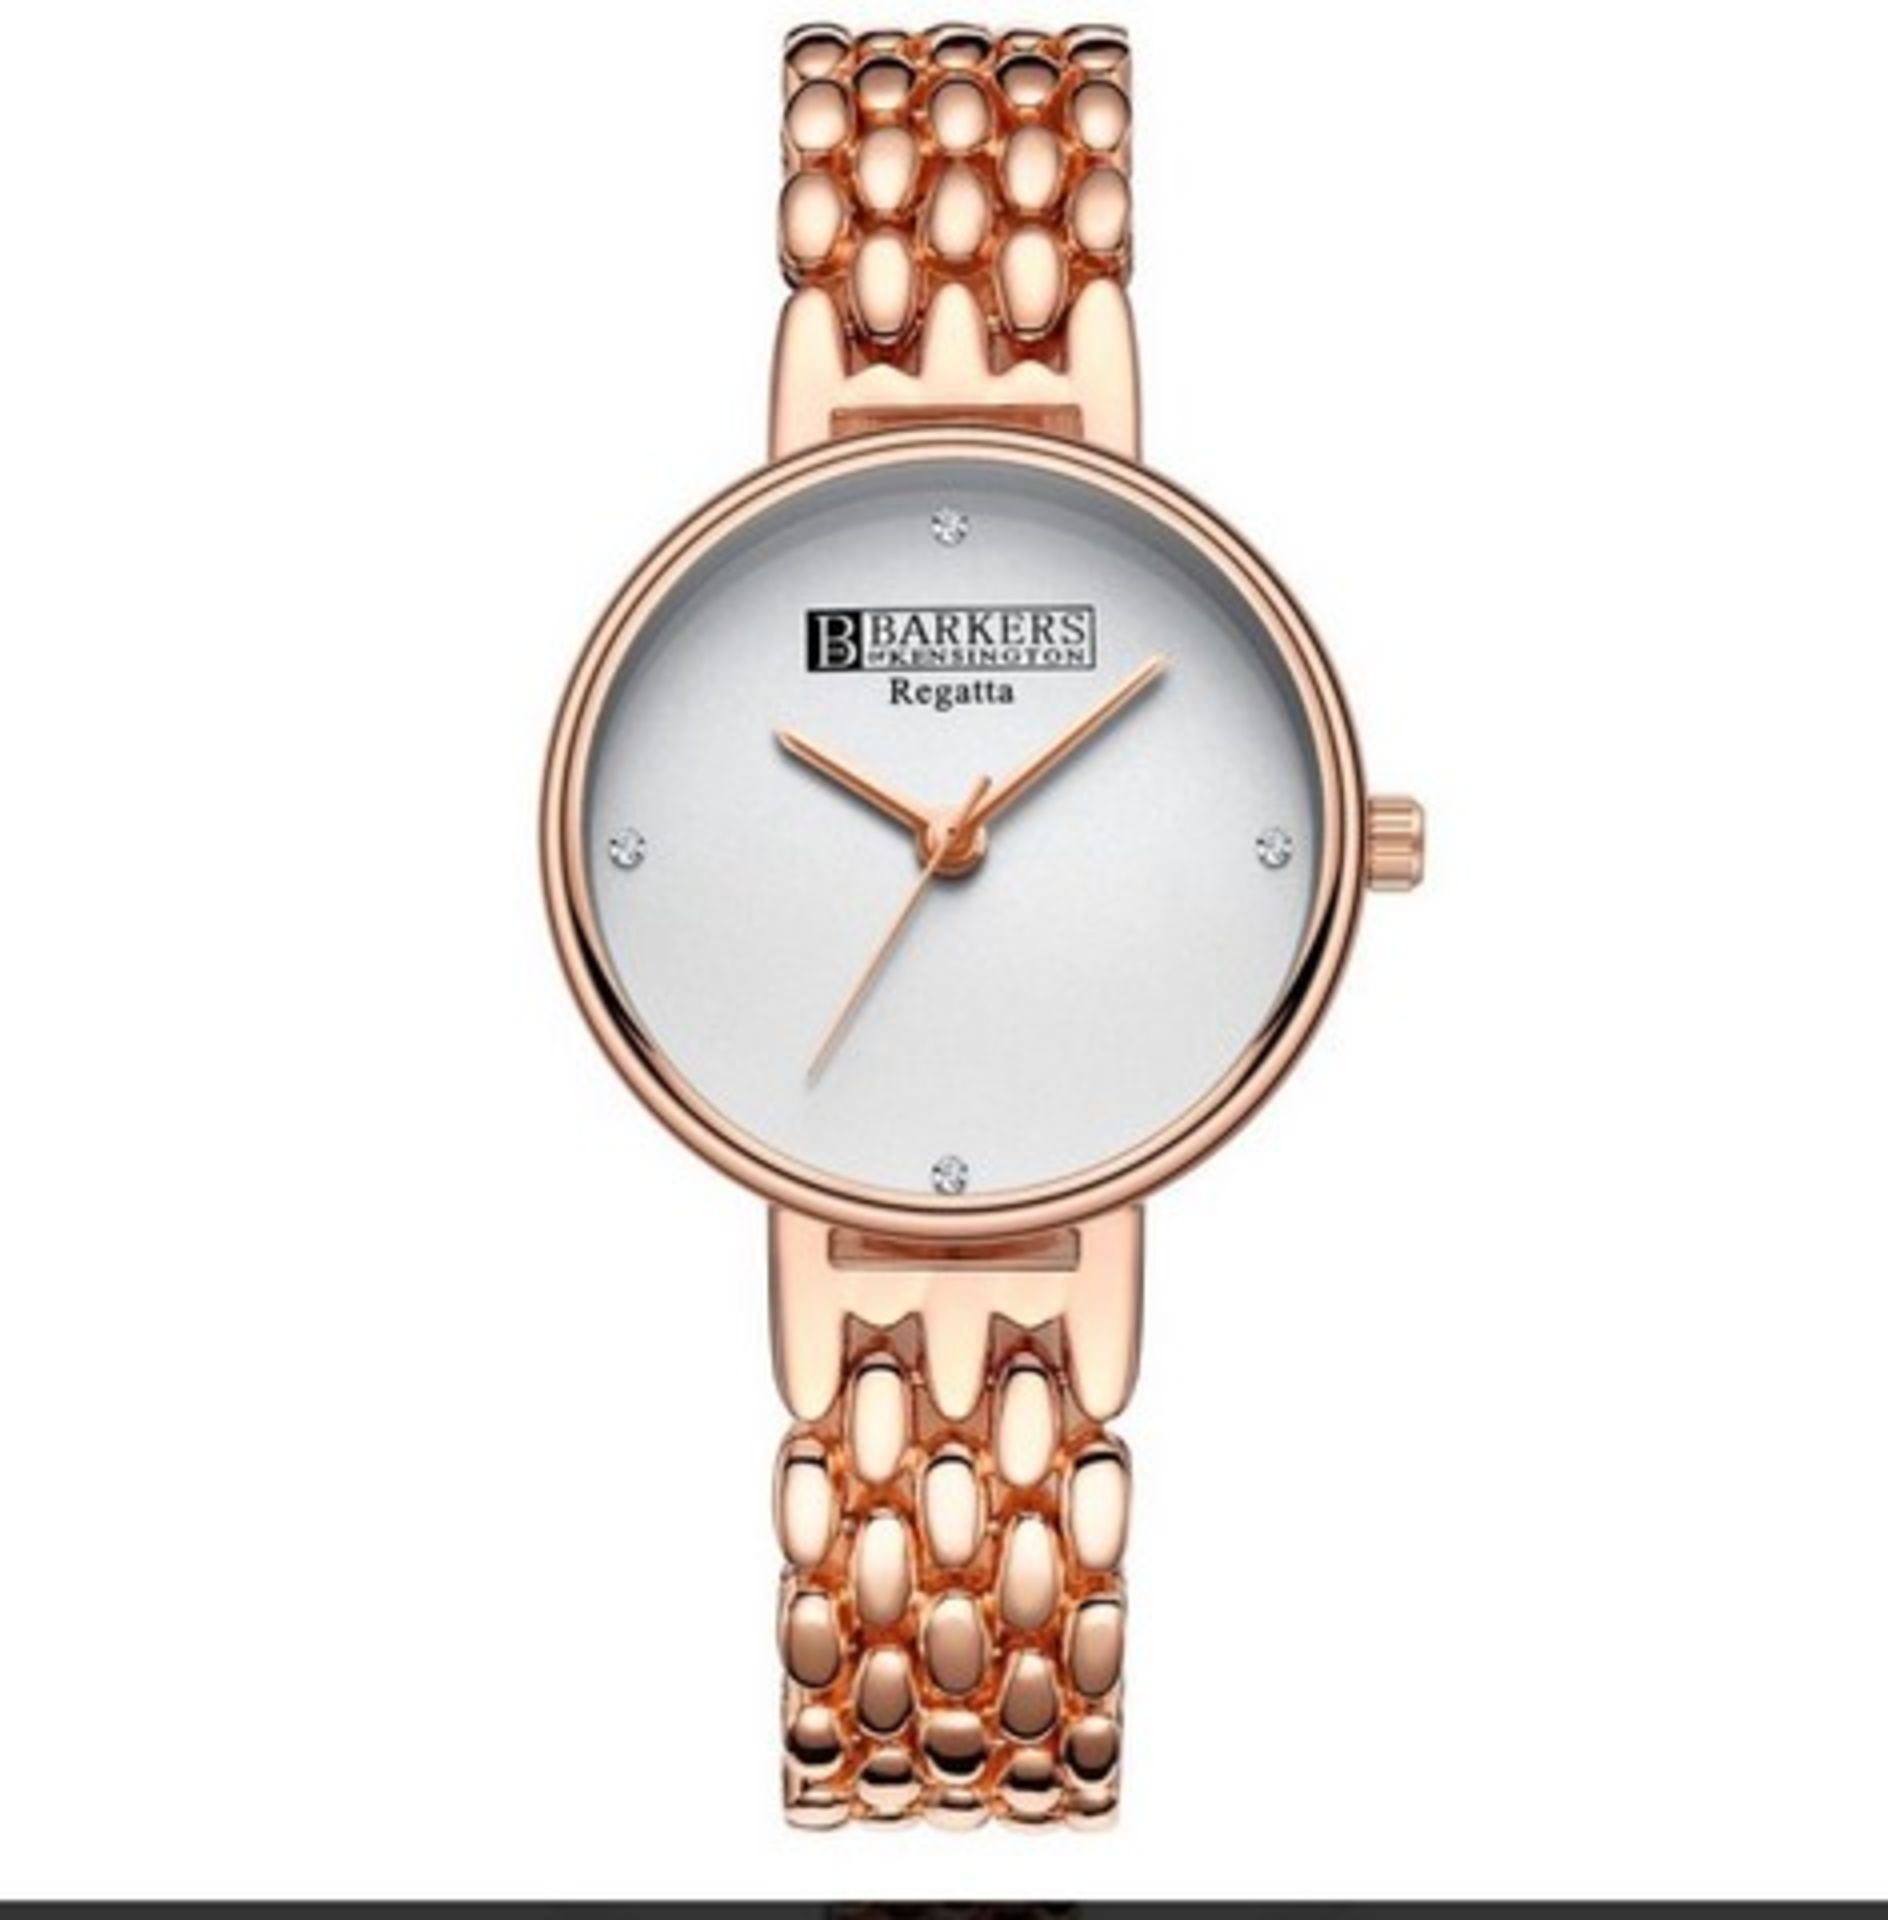 V Brand New Barkers Of Kensington Ladies Elegant Rose Gold Plated Regatta Watch Set With Four